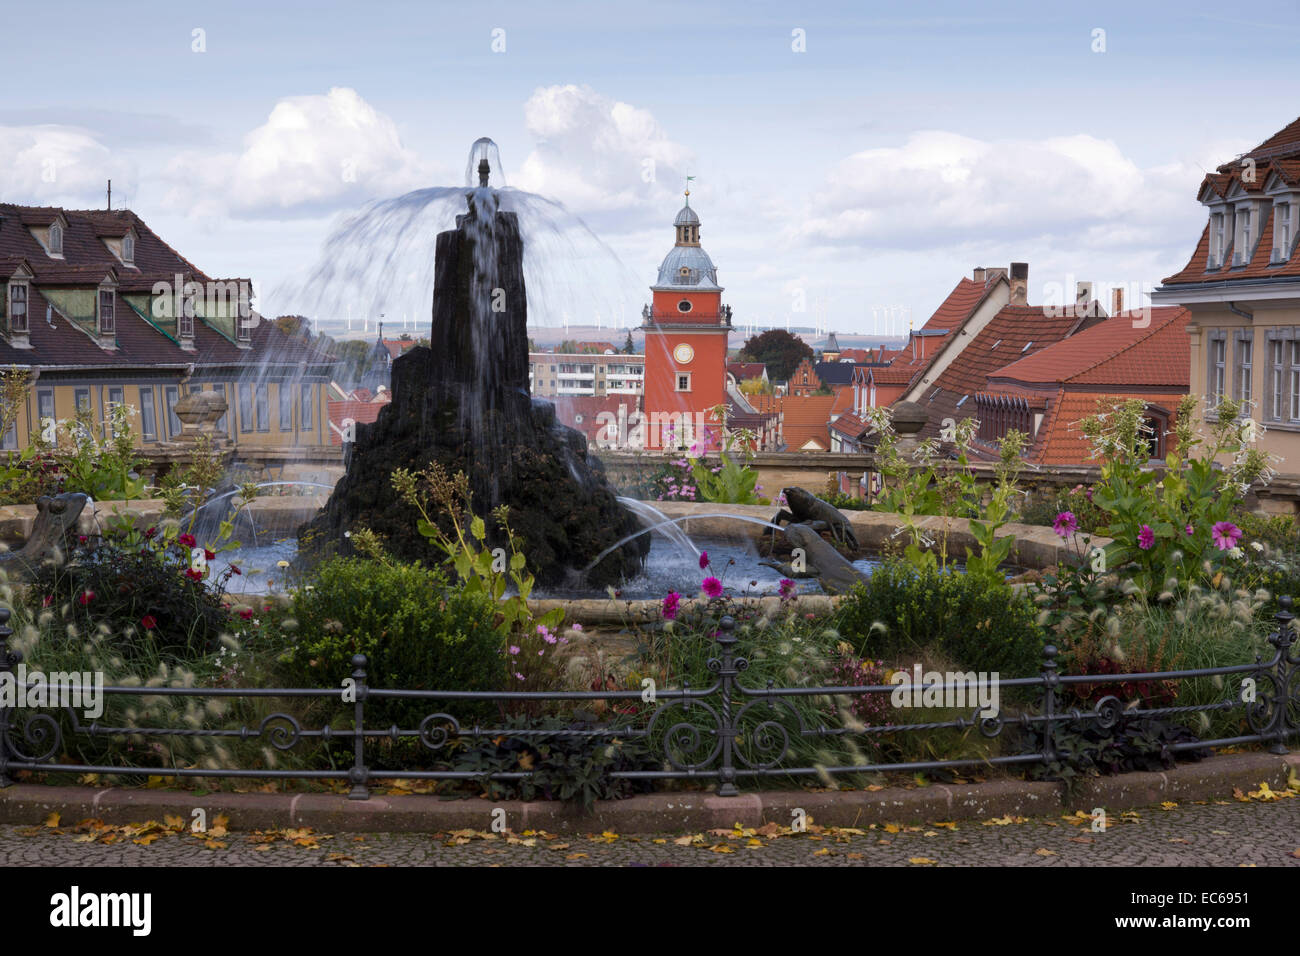 View of Gotha with the fountain and the historic town hall tower, Gotha, Thuringia, Germany, Europe Stock Photo